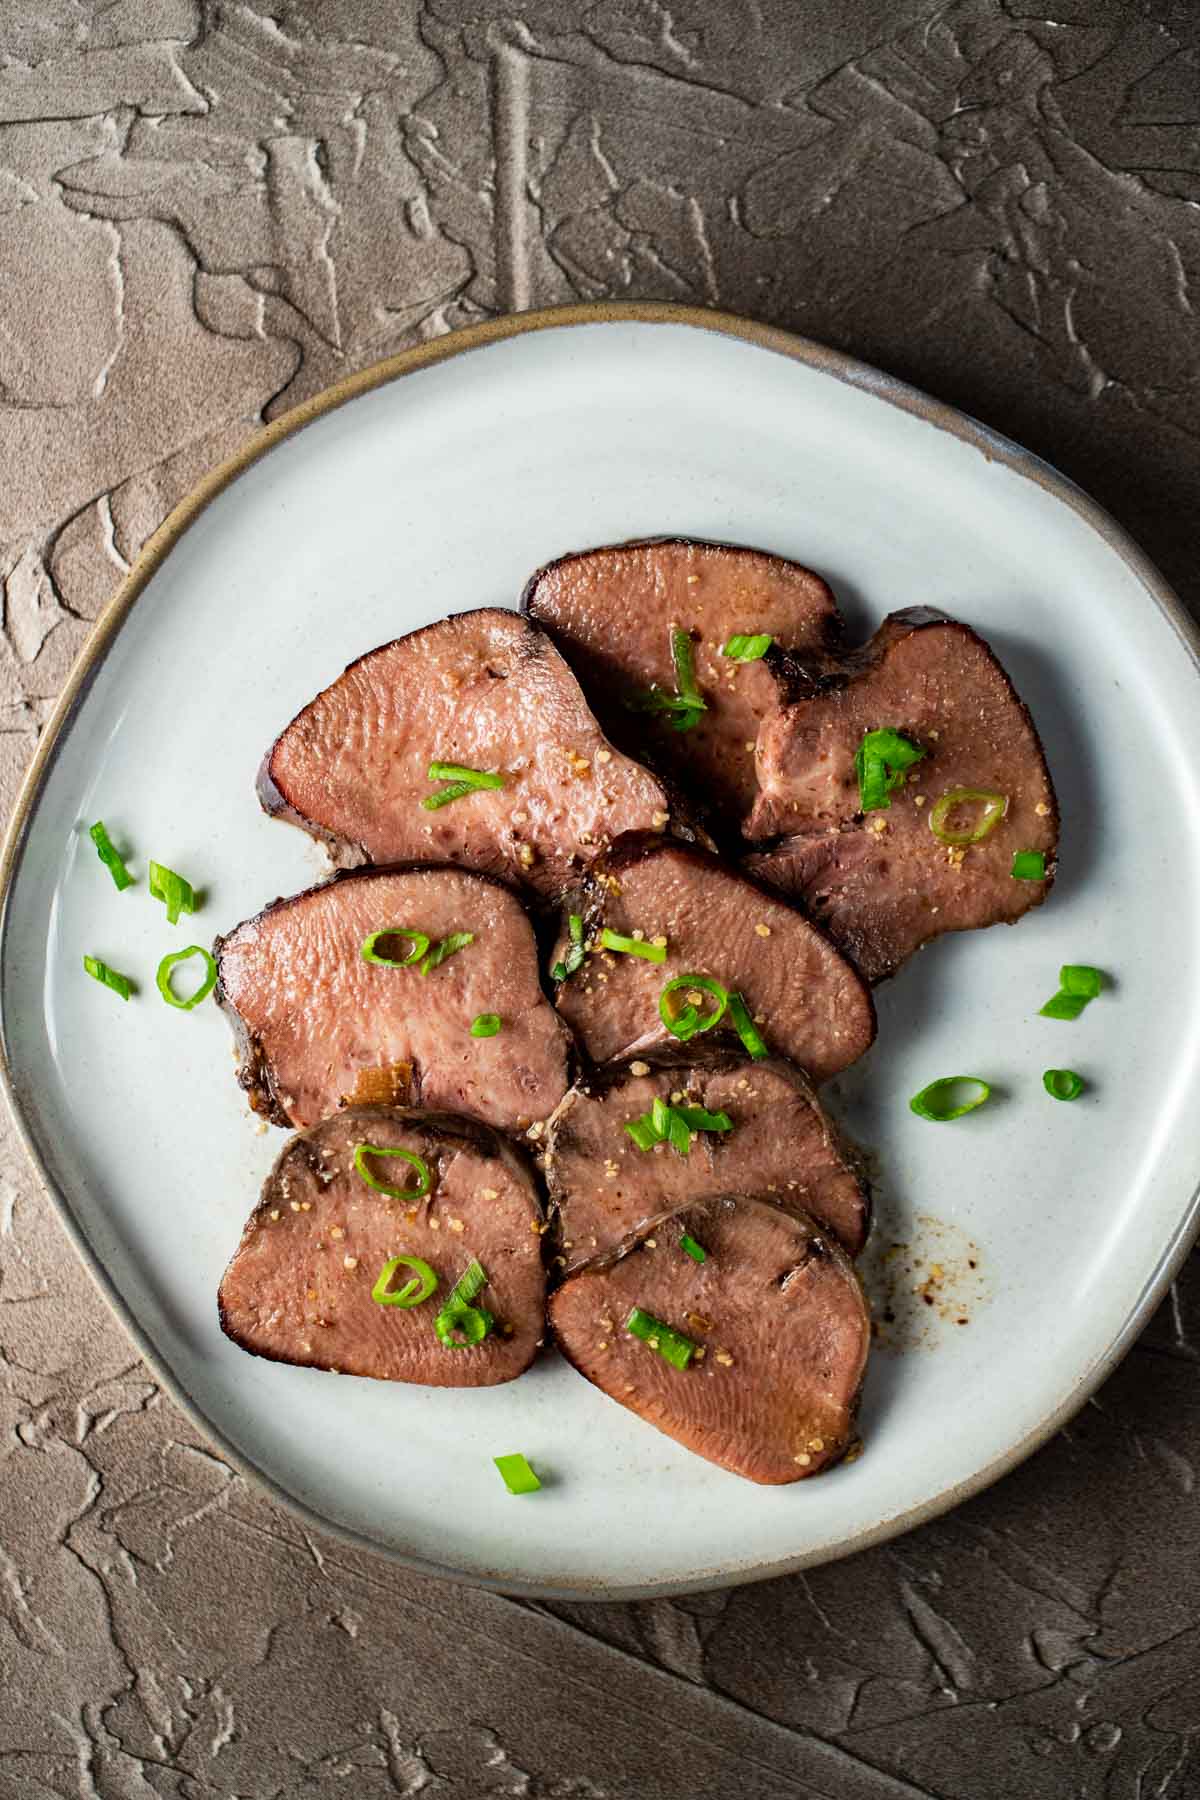 https://www.wenthere8this.com/wp-content/uploads/2022/09/sous-vide-beef-tongue-2.jpg